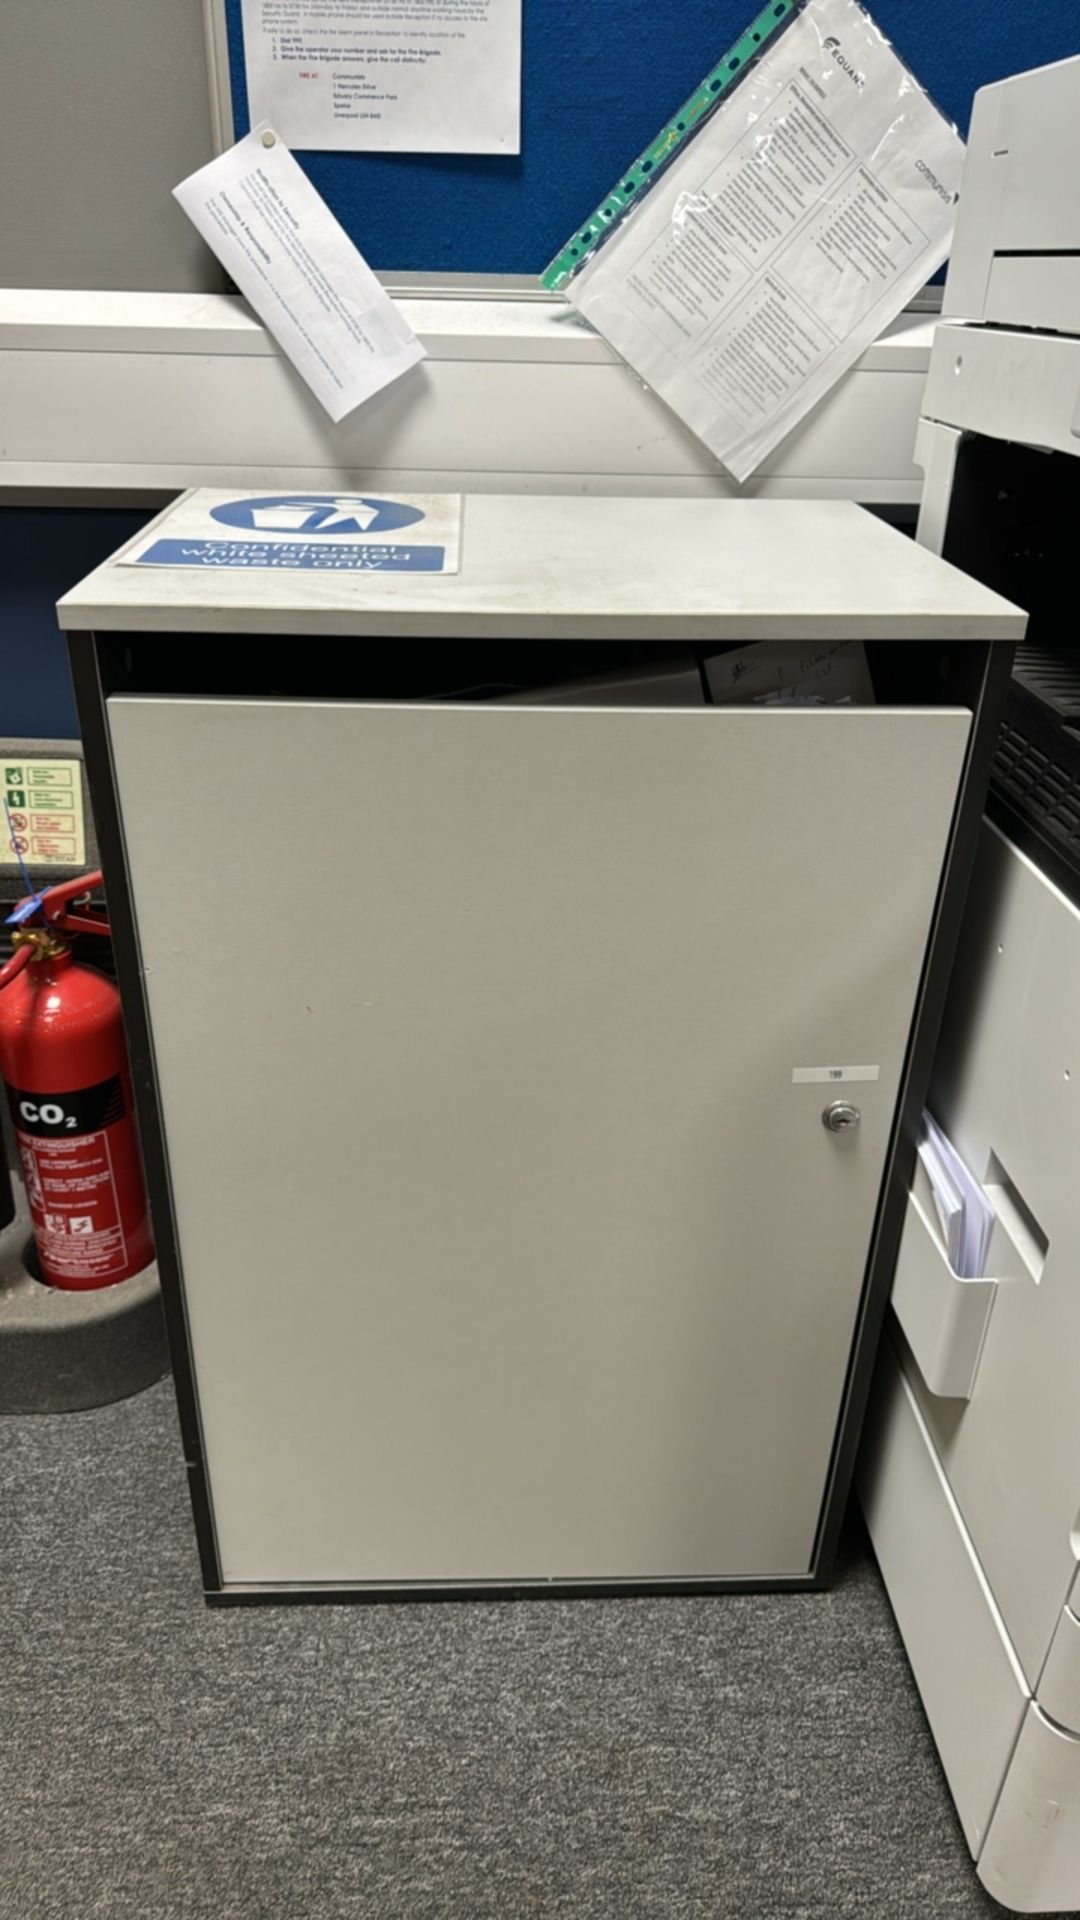 Confidential Paper Waste Bin - Image 2 of 5